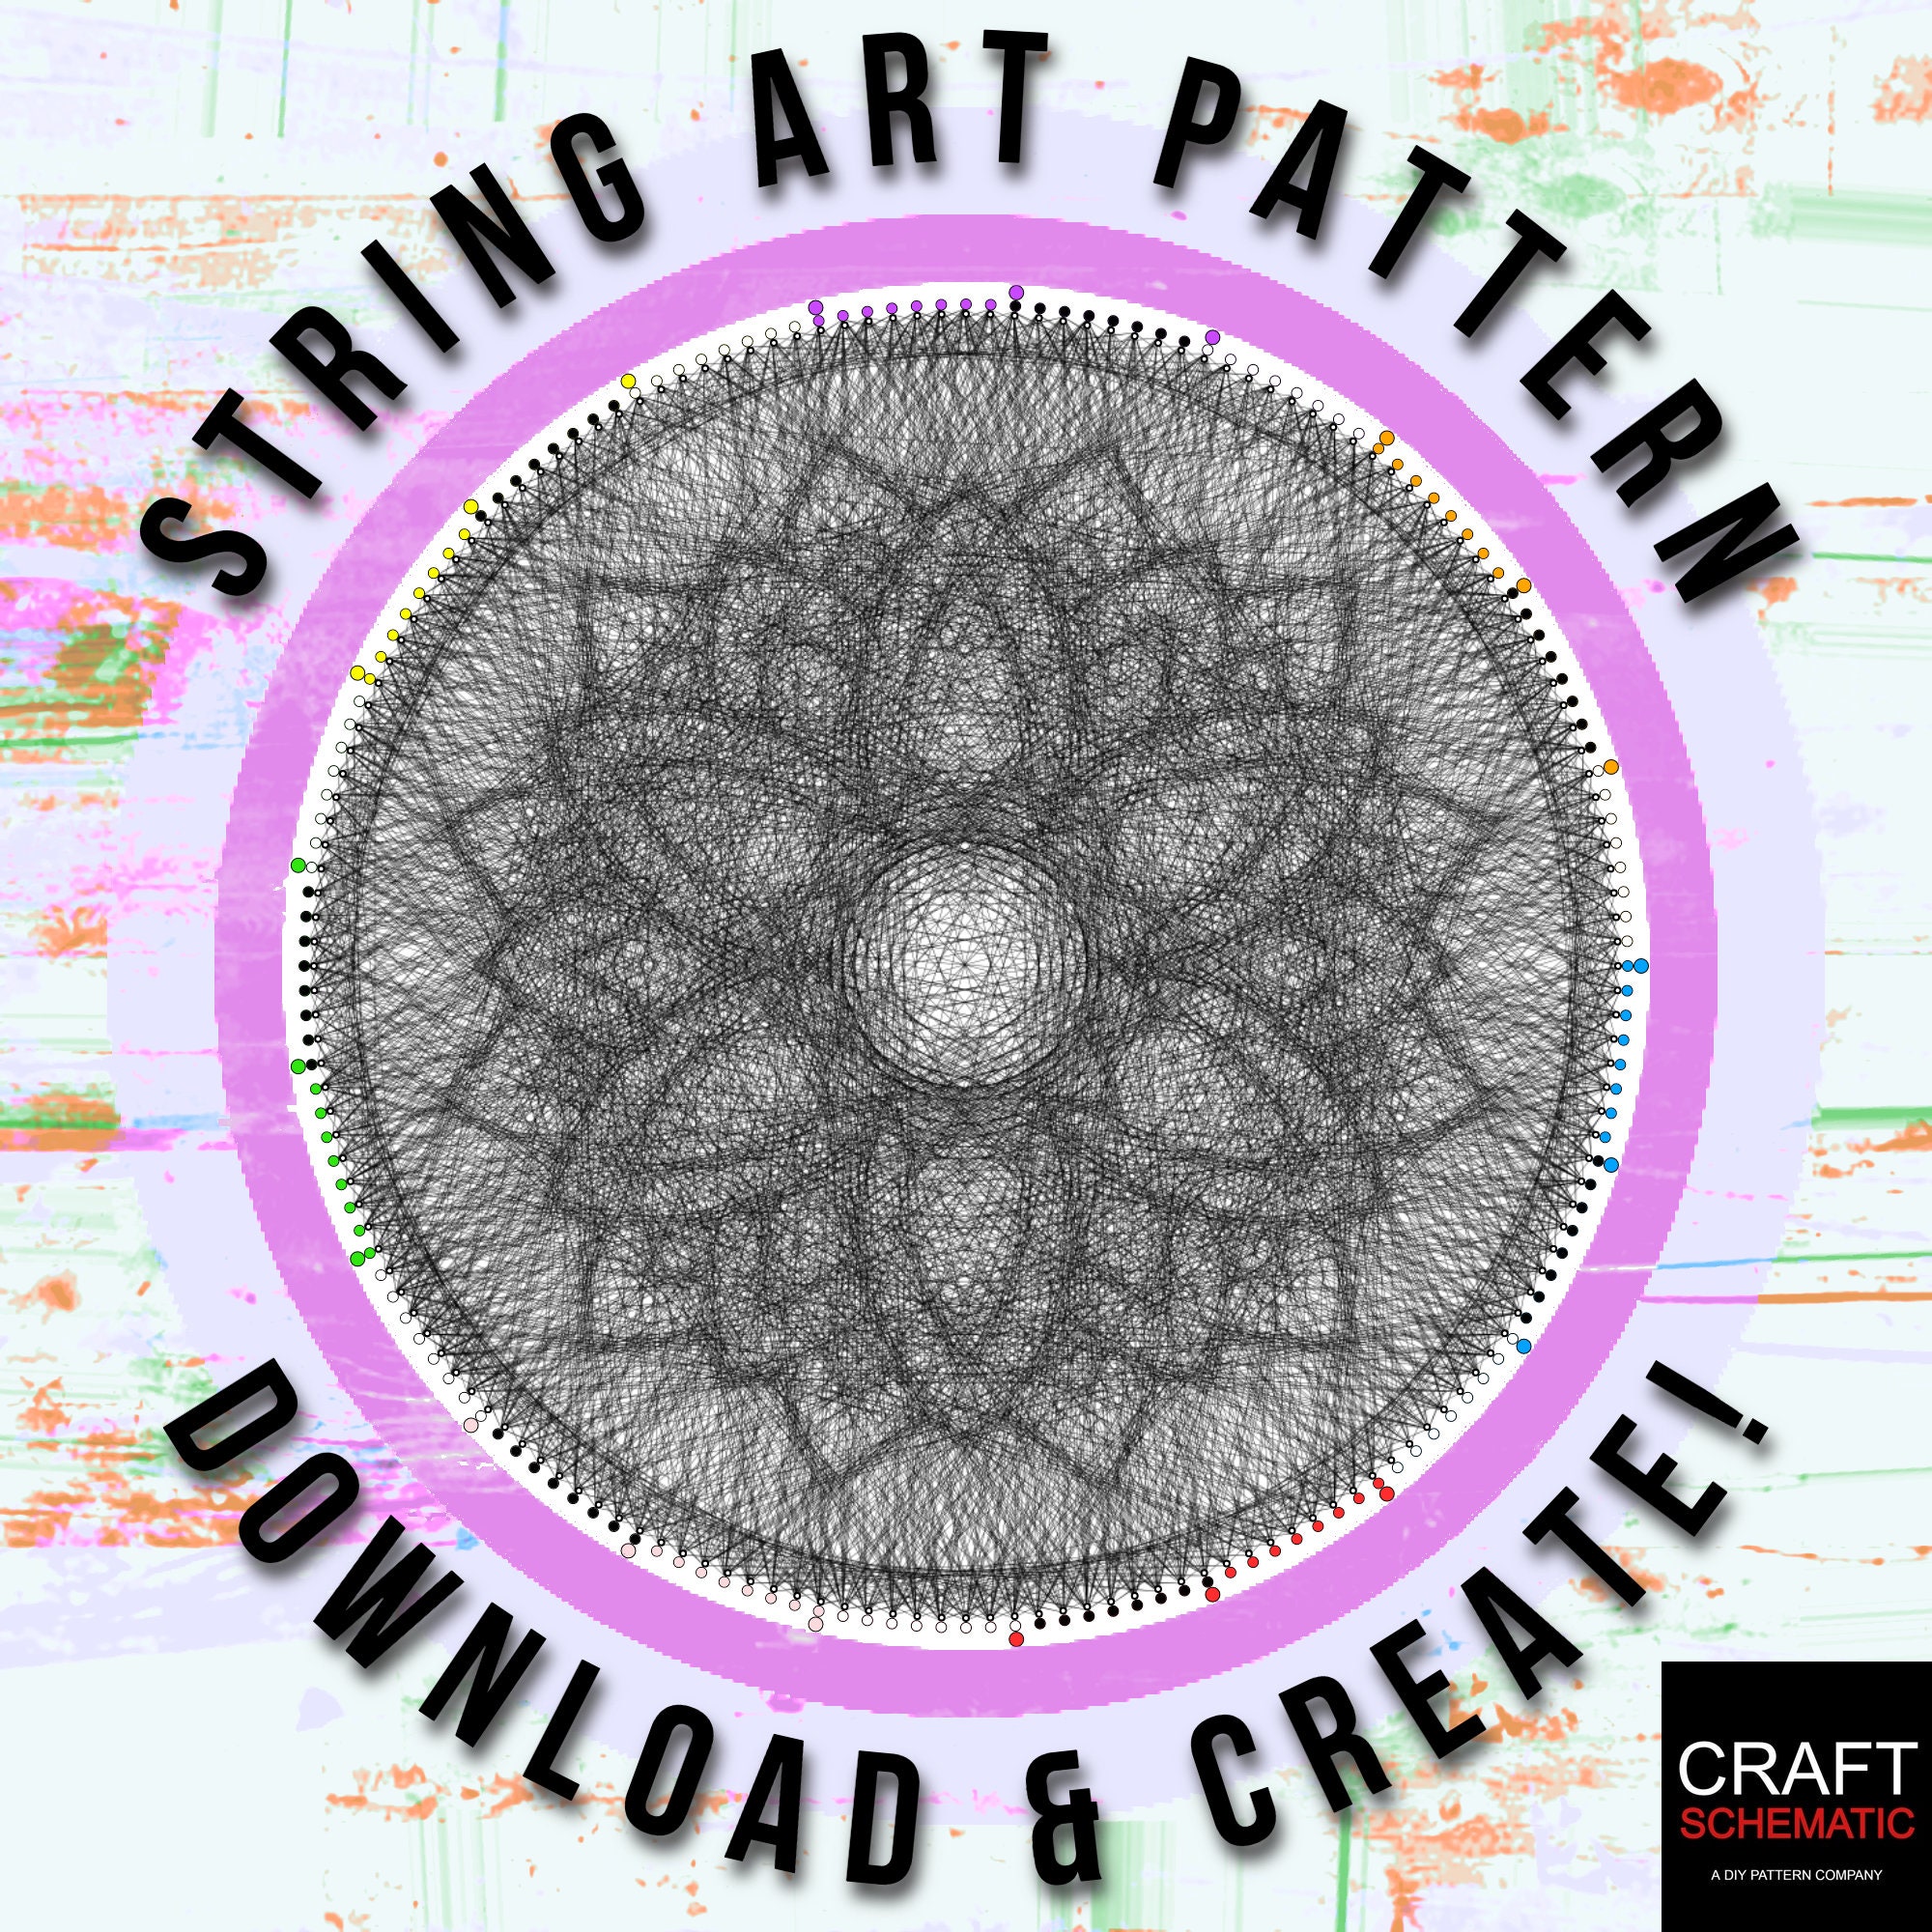  MindArts String Art Kit for Adults - DIY String Art with All  Necessary Accessories, Personalized Round Design, Craft Kit, Circle Table -  Home Decoration, Customized Gifts